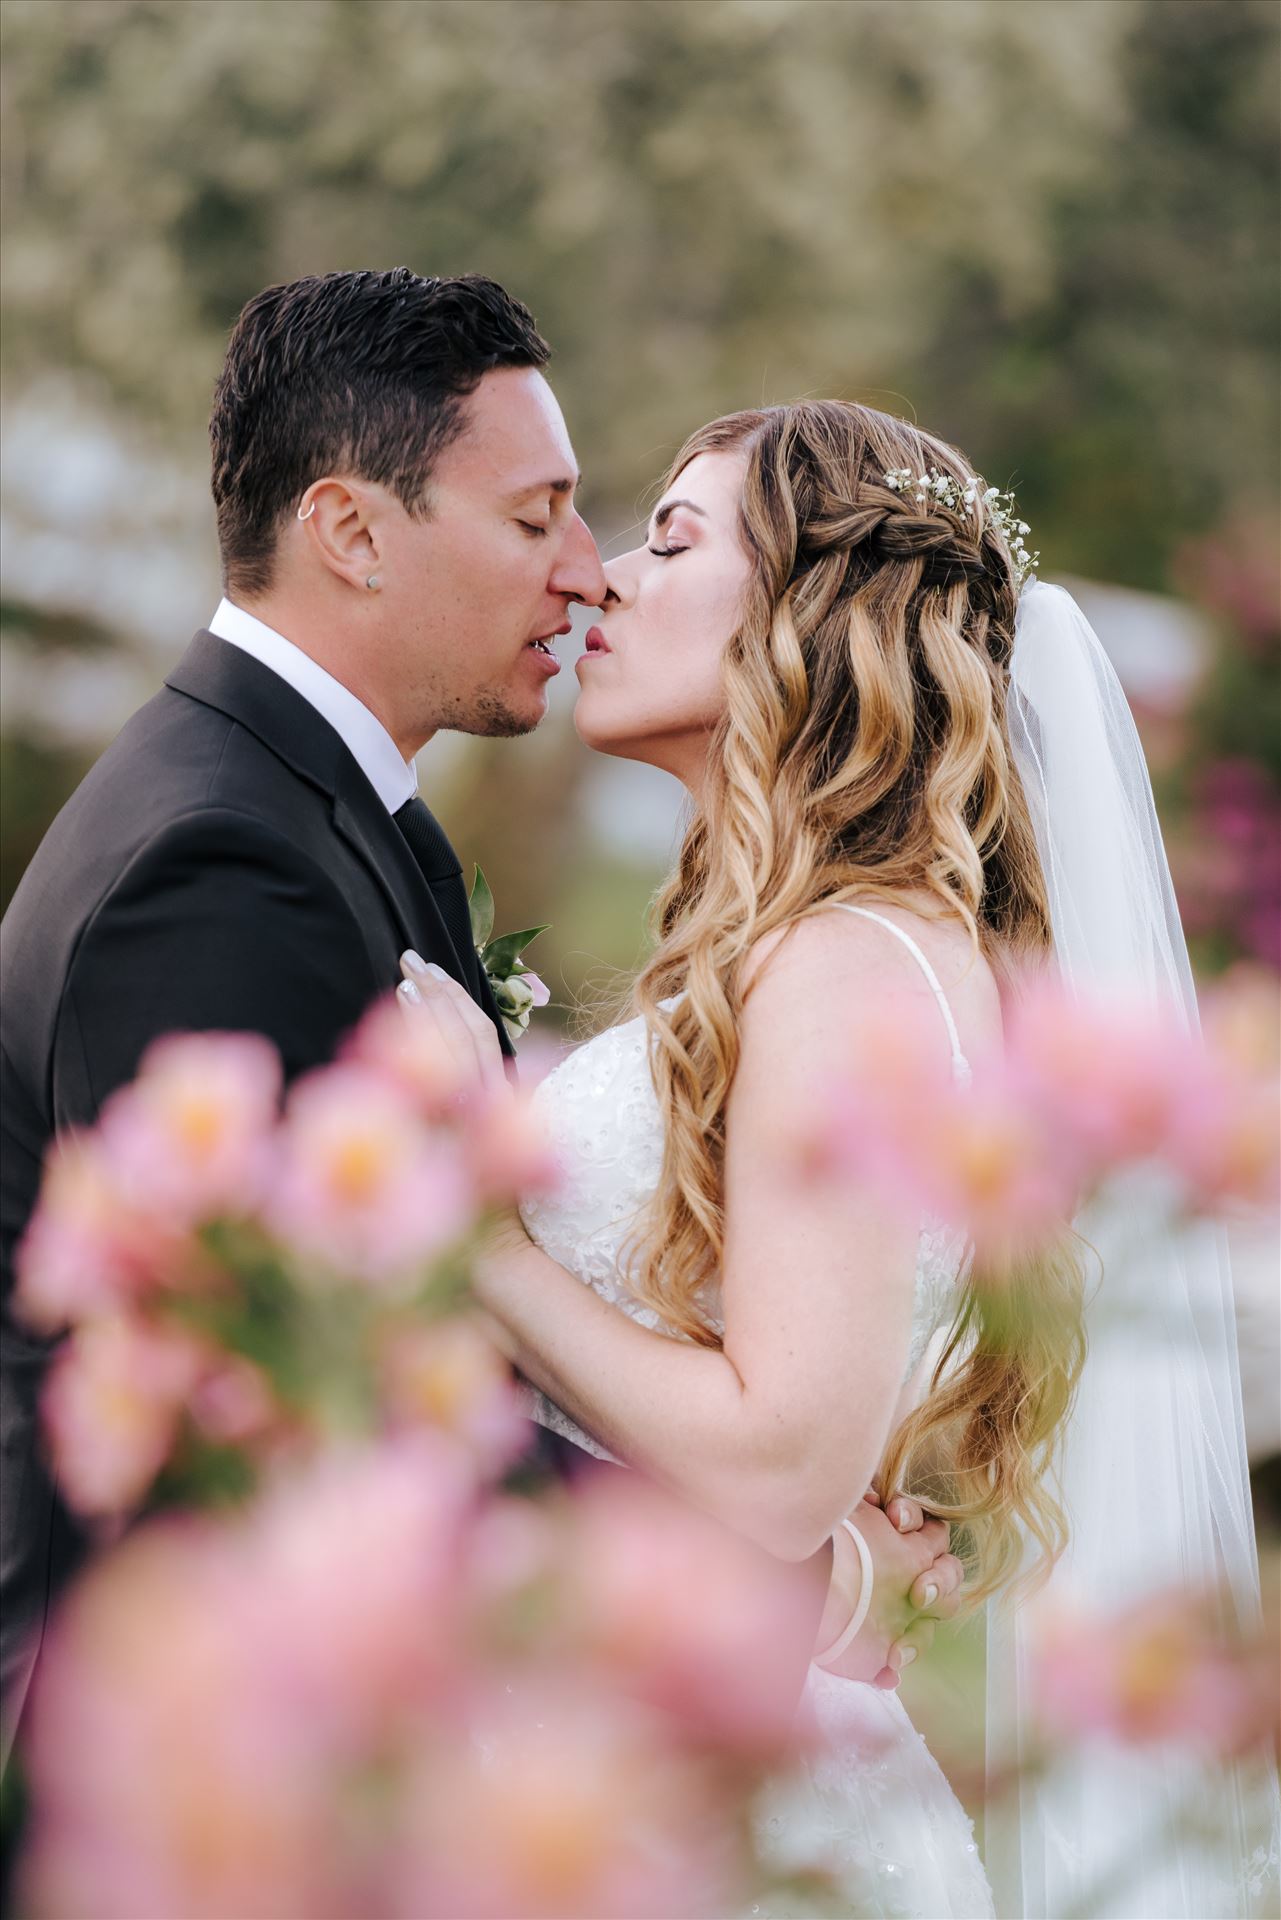 FW-6736.JPG Mirror's Edge Photography, a San Luis Obispo Wedding and Engagement Photographer, captures Rashel and Brian's Wedding Day at the Madonna Inn in San Luis Obispo. A secret kiss in the secret garden. by Sarah Williams